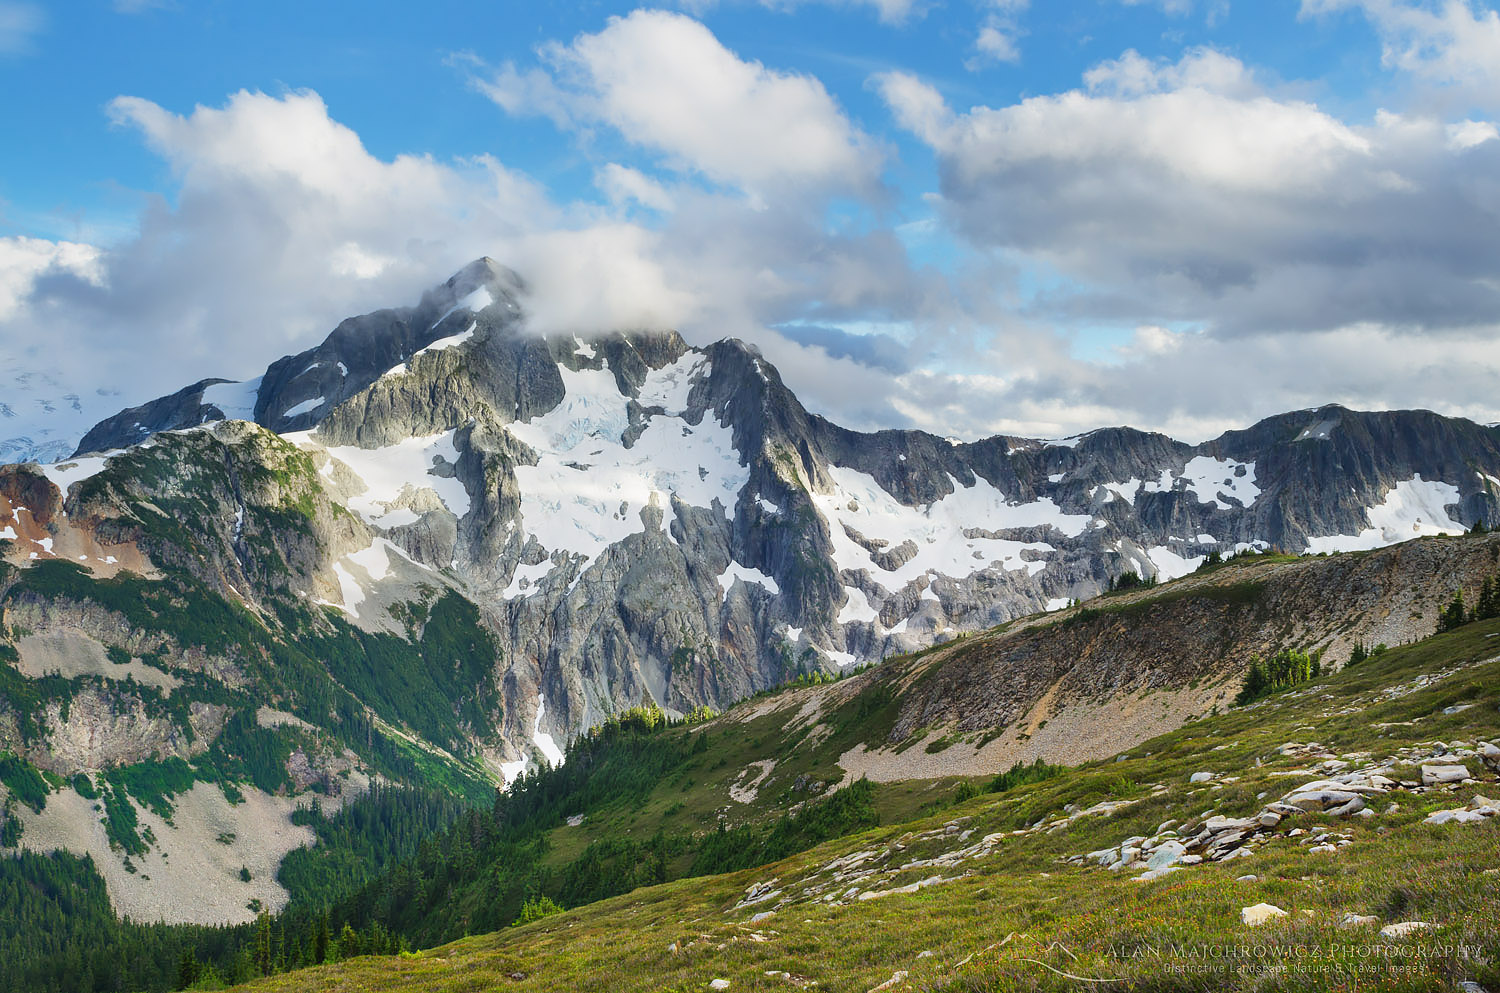 North face of Whatcom Peak seen from Red Face Mountain, North Cascades National Park #61594